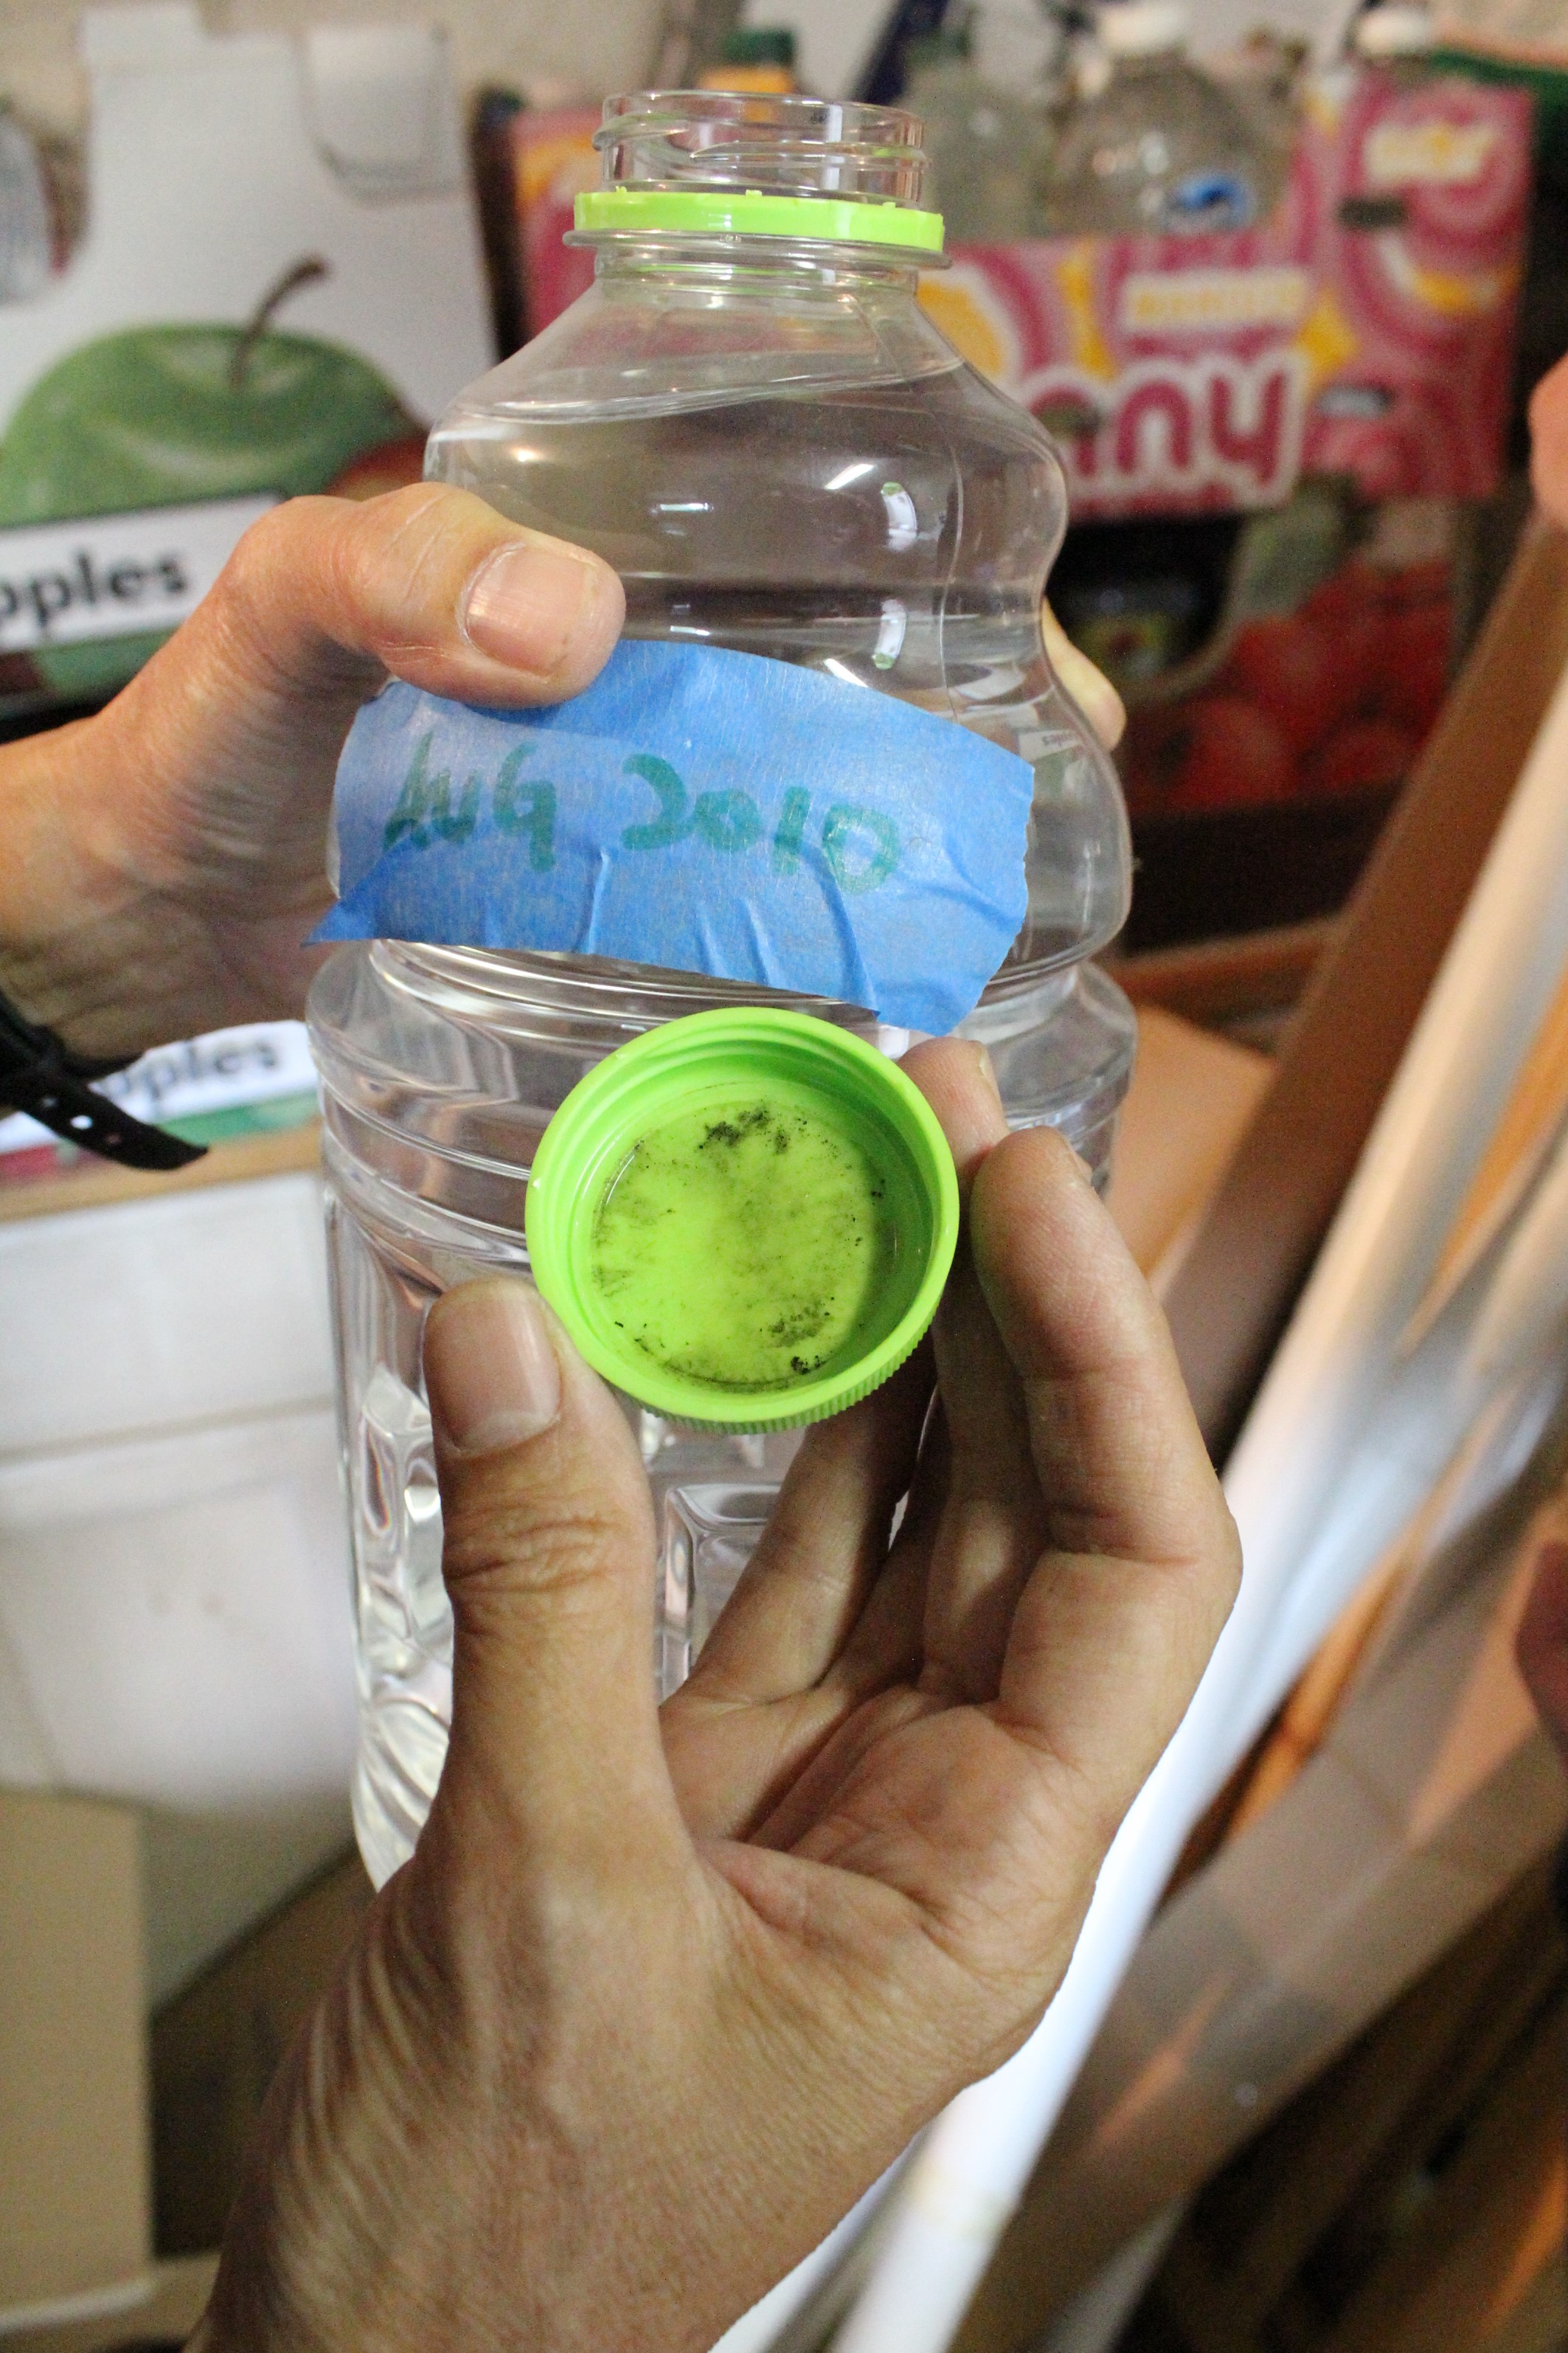 KUOW - You may want to check your emergency water, because we did and ours  was ... MOLDY